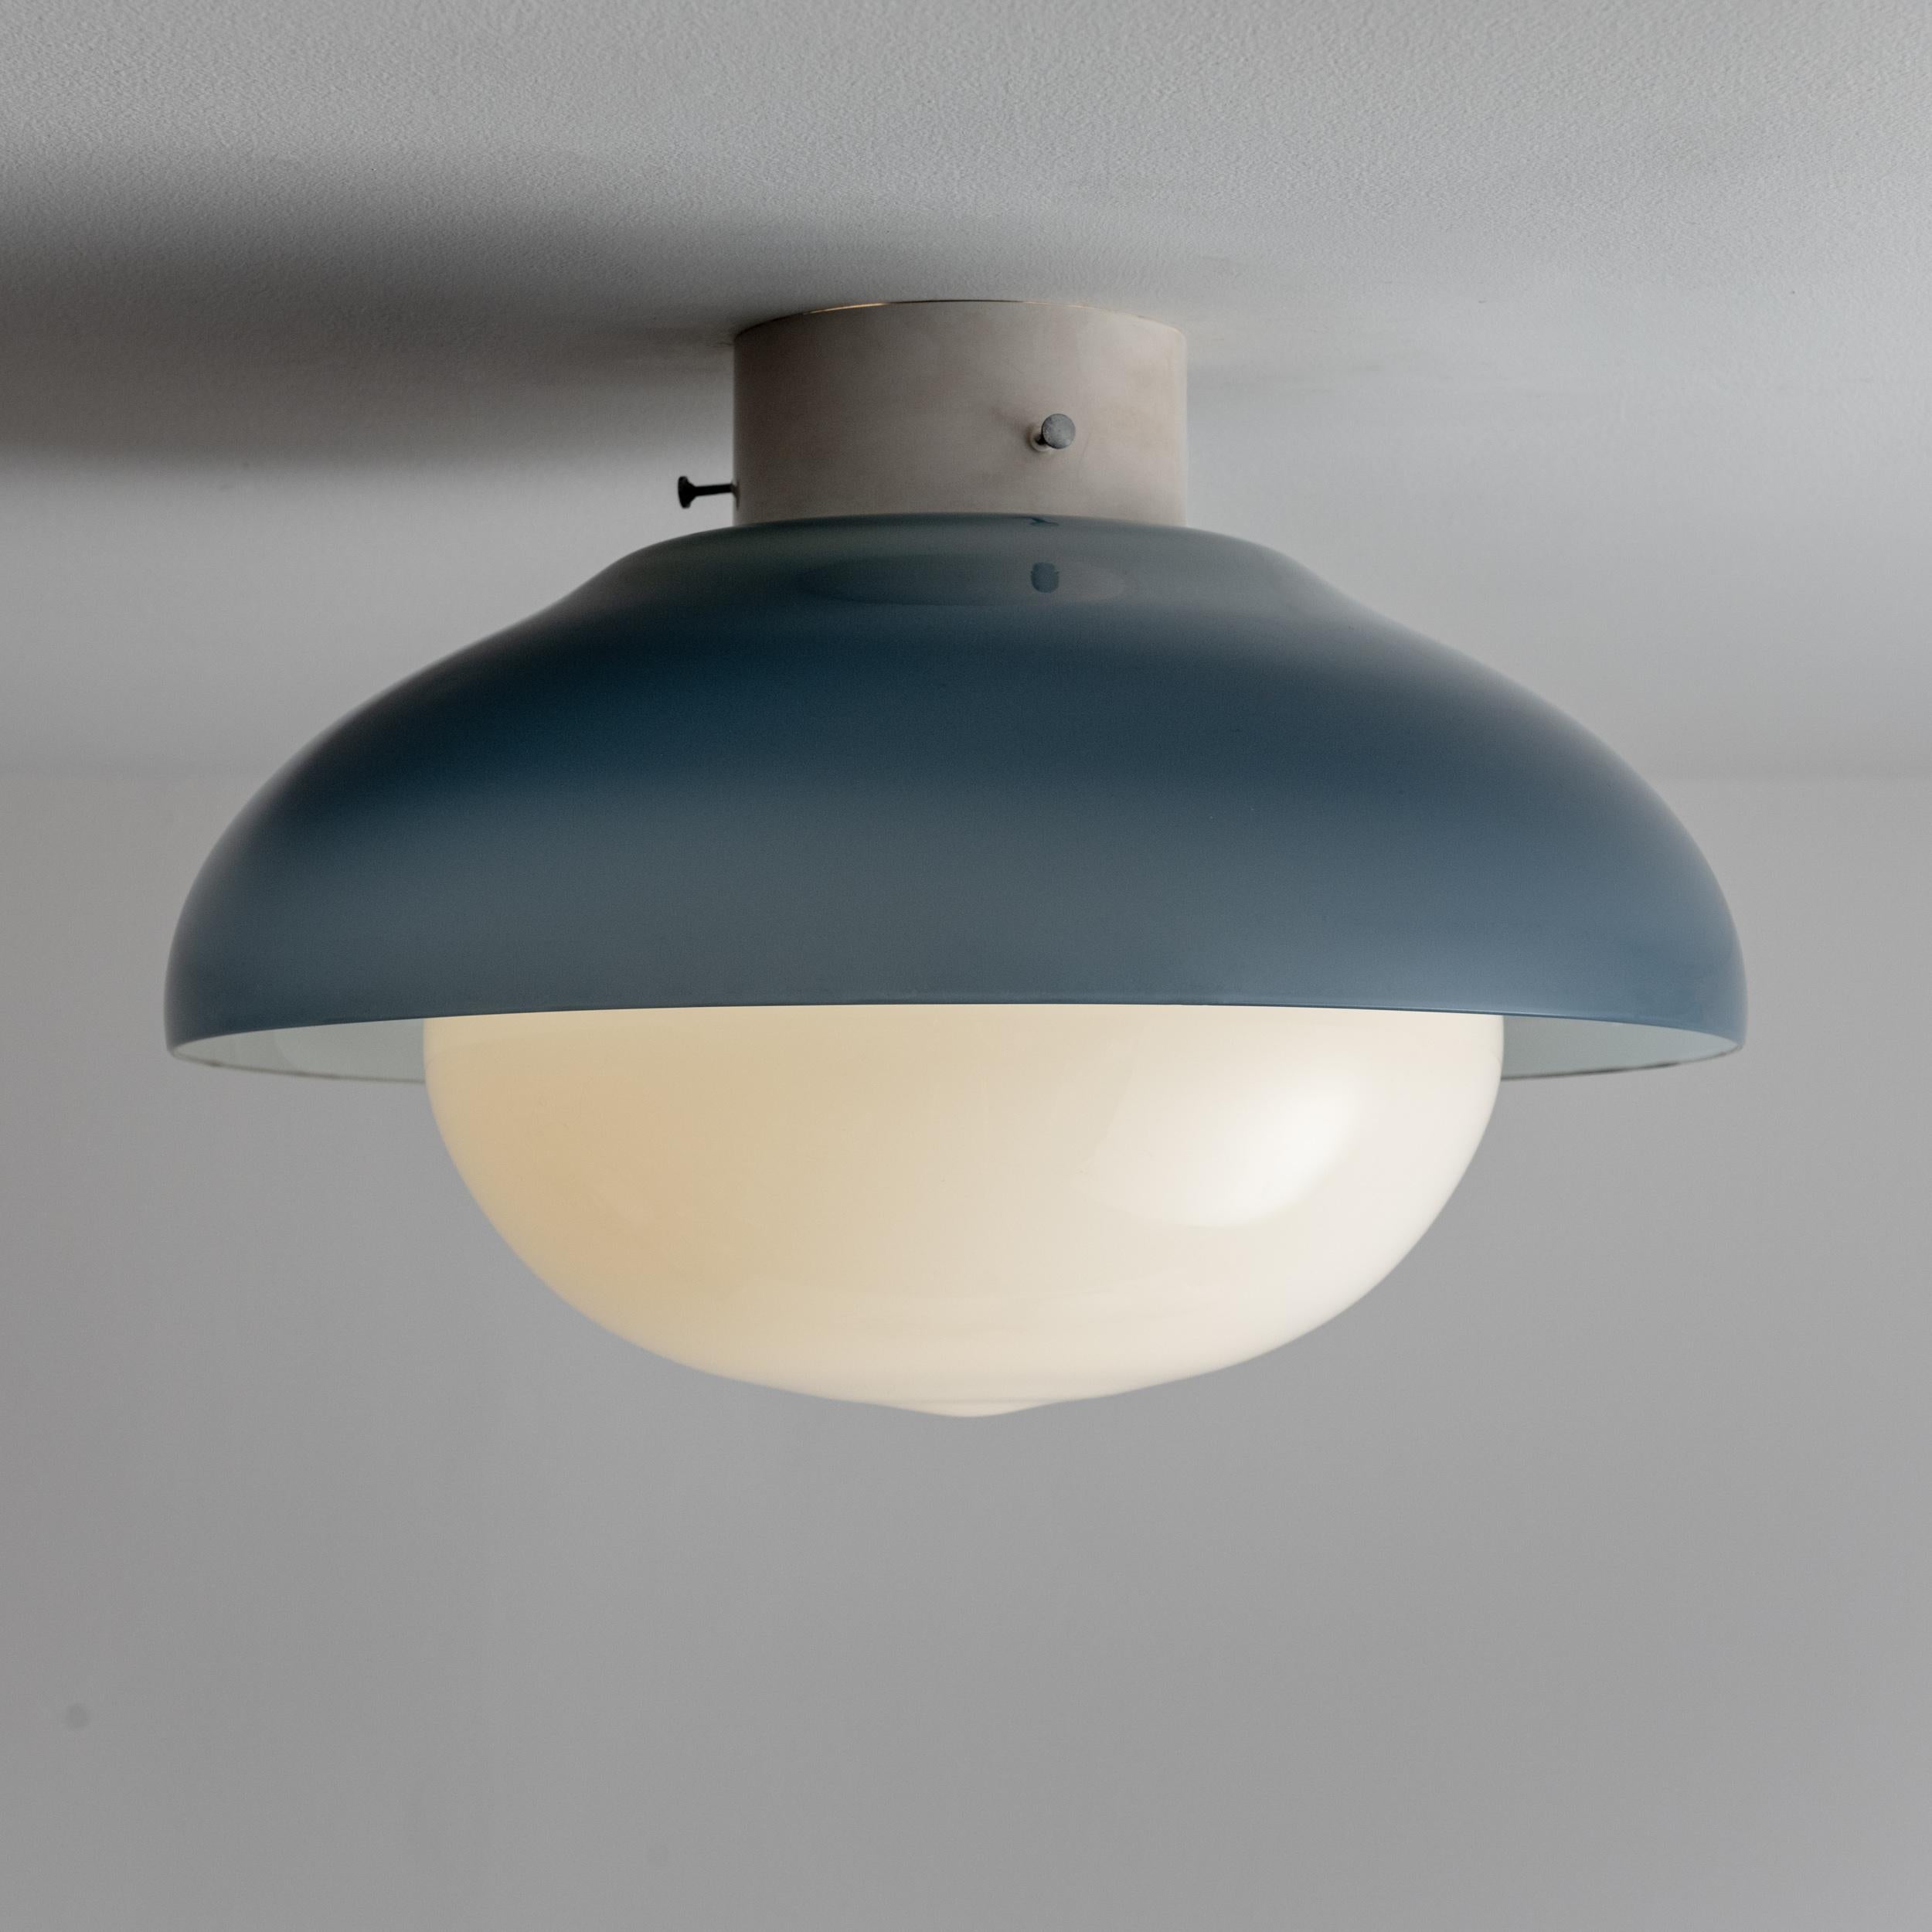 Flush Mount Ceiling Lamp by: Carlo Nason for Vistosi. Designed and manufactured in Italy, circa 1970's. Glass. Painted metal. Rewired for U.S. standards, We recommend. 1 E27 60w maximum bulb per fixture. Bulbs not included. QTY: 2 Available, priced